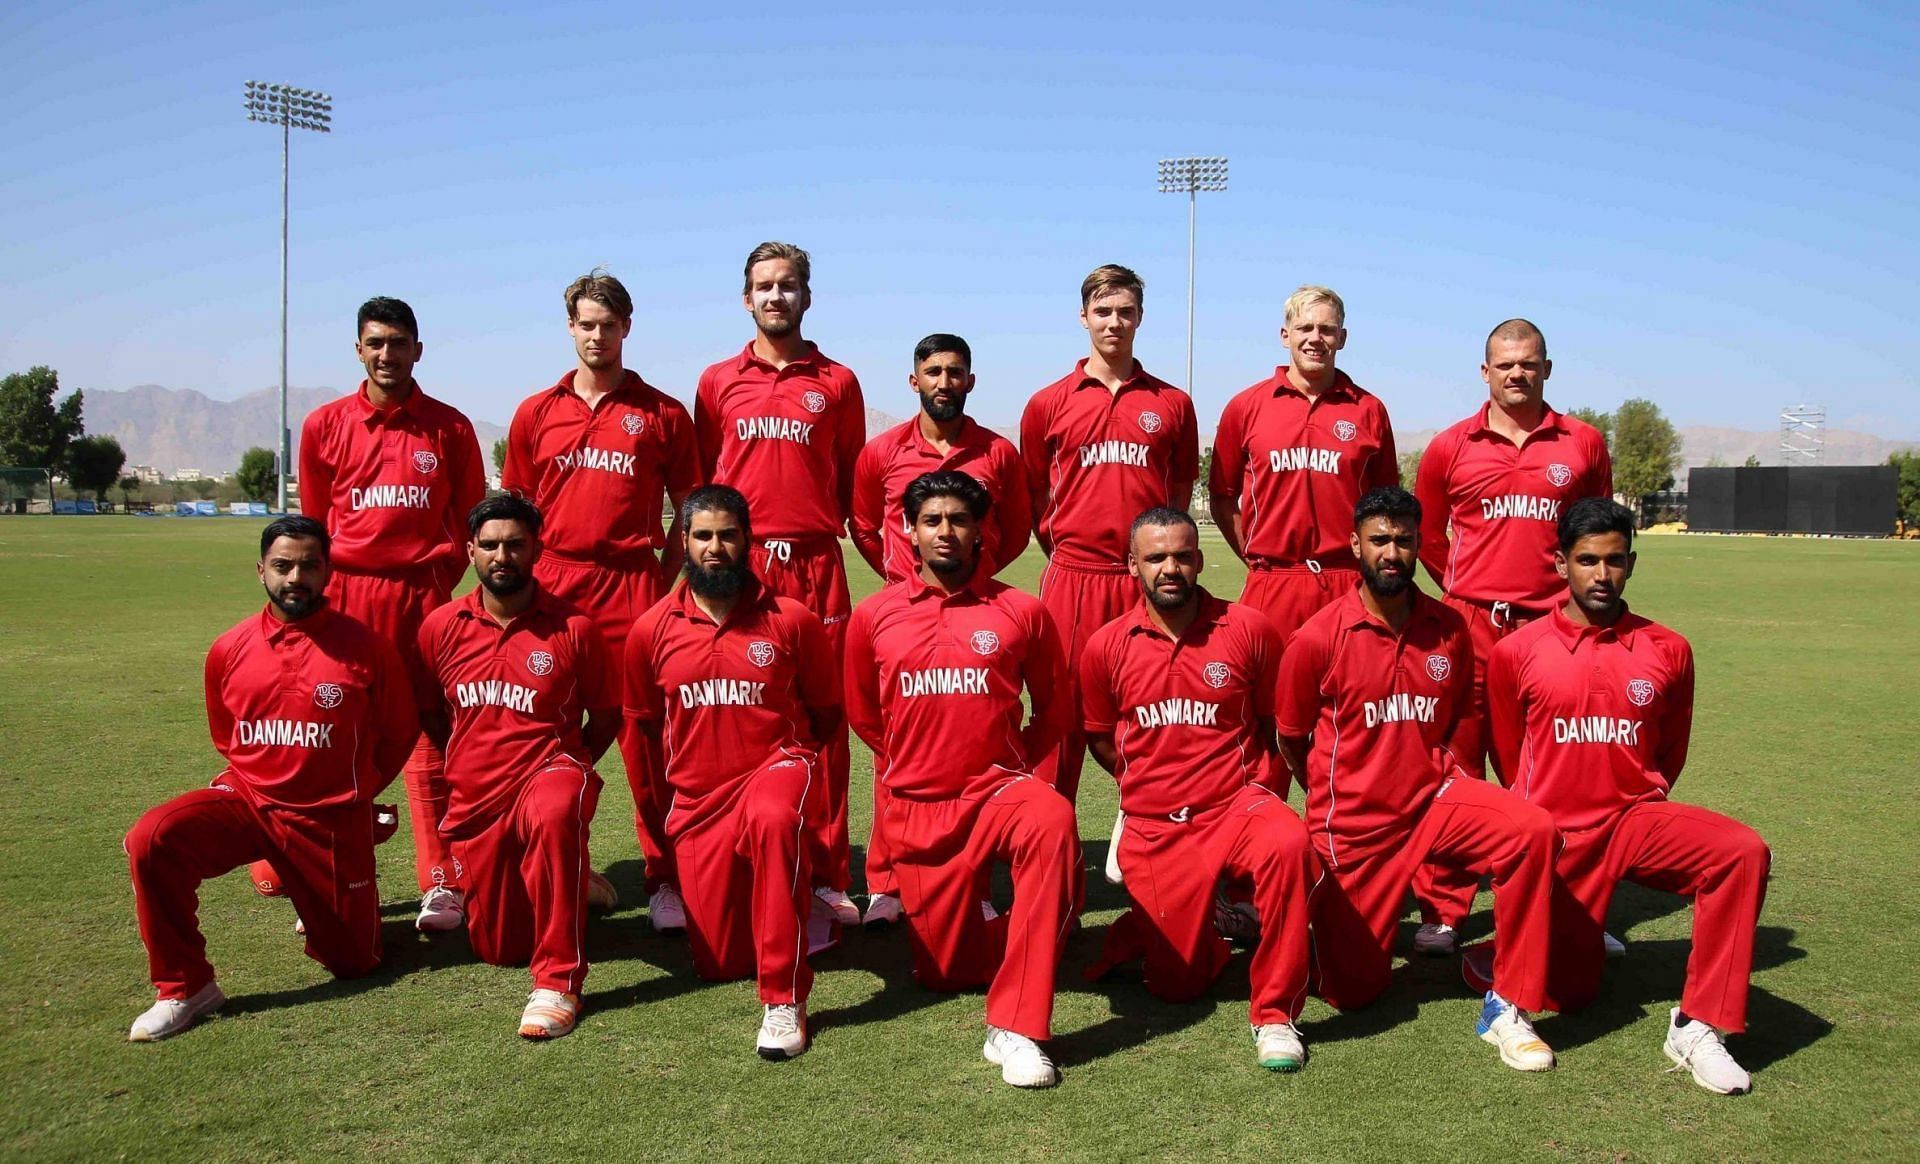 The Denmark side will be looking to clinch the series on Sunday